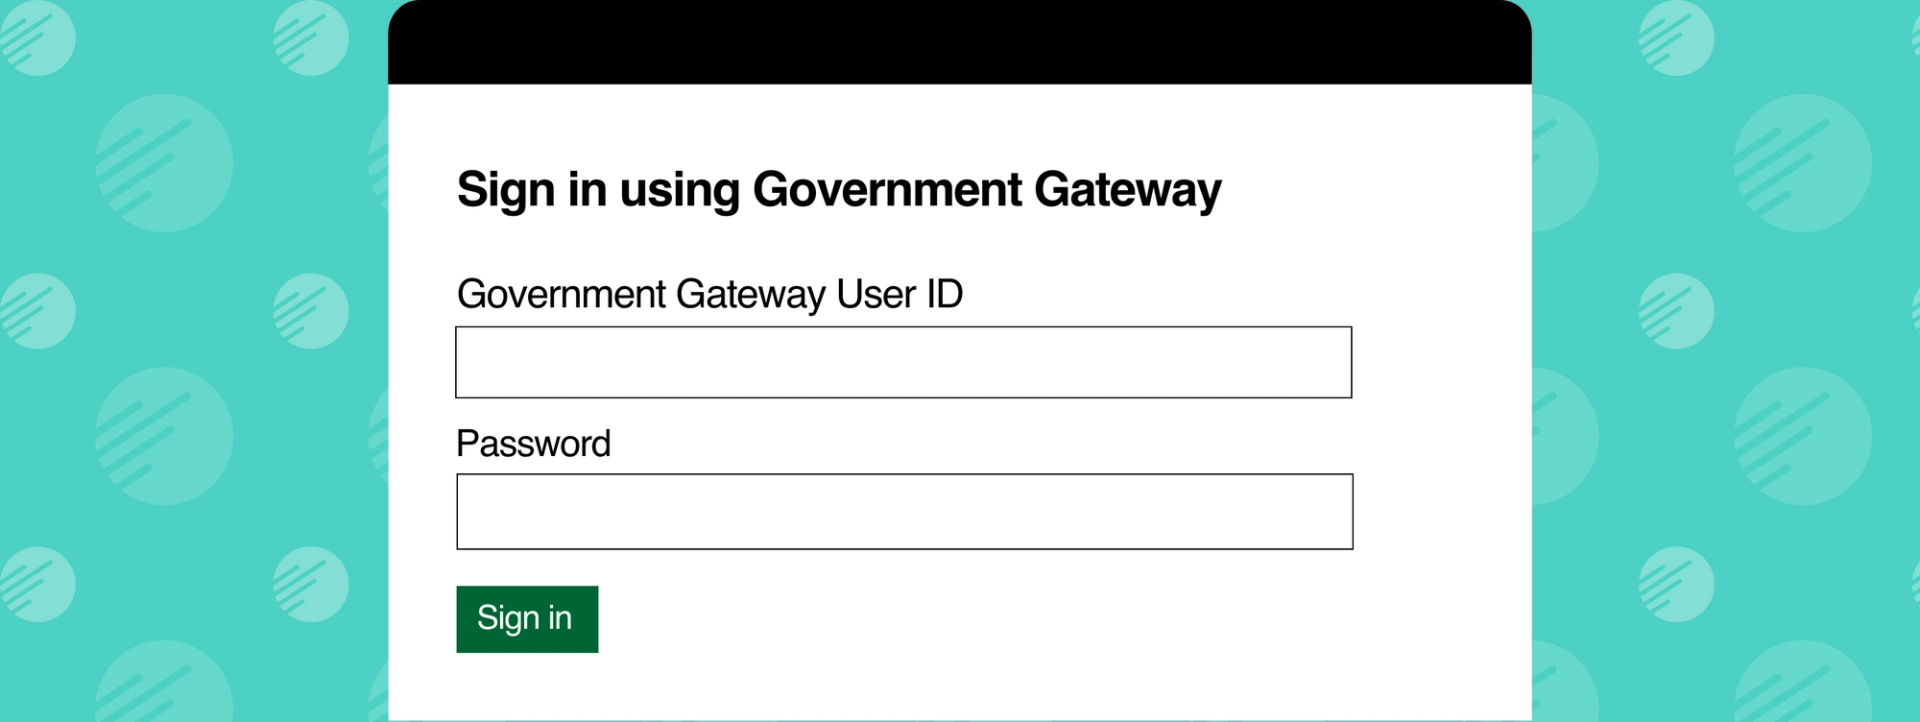 A screenshot of the sign in to the Government Gateway